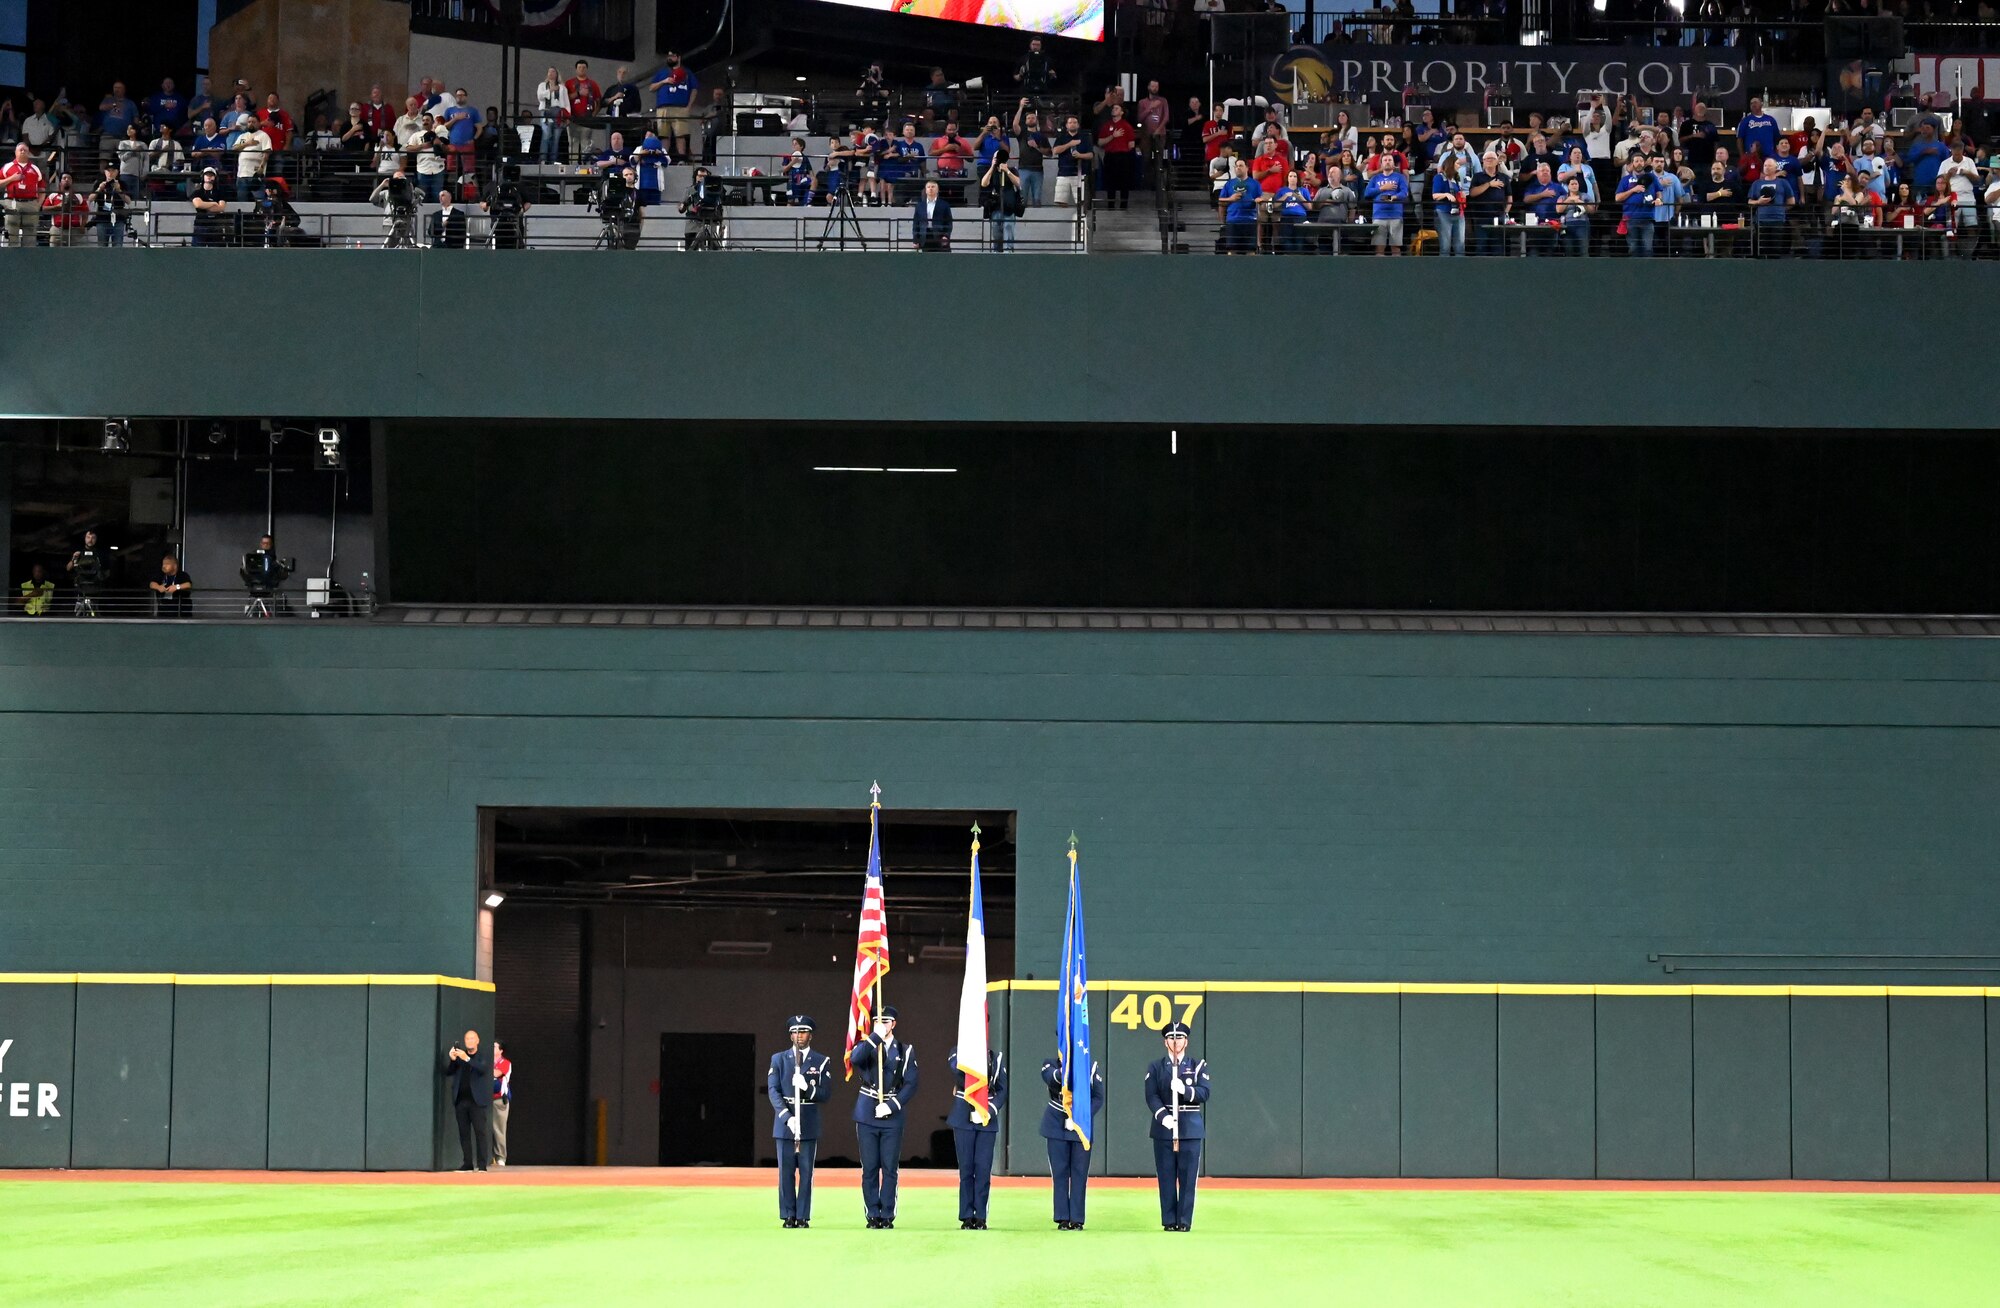 The Dyess Honor Guard presents the colors during the national anthem at the World Series opening game at Globe Life Field in Arlington, Texas, Oct. 27, 2023. The honor guard presented the U.S., Texas and Air Force flags to more than 40,300 attendees showcasing the Air Force Honor Guard mission of delivering ceremonial honors to inspire the nation. (U.S. Air Force photo by Staff Sgt. Holly Cook)